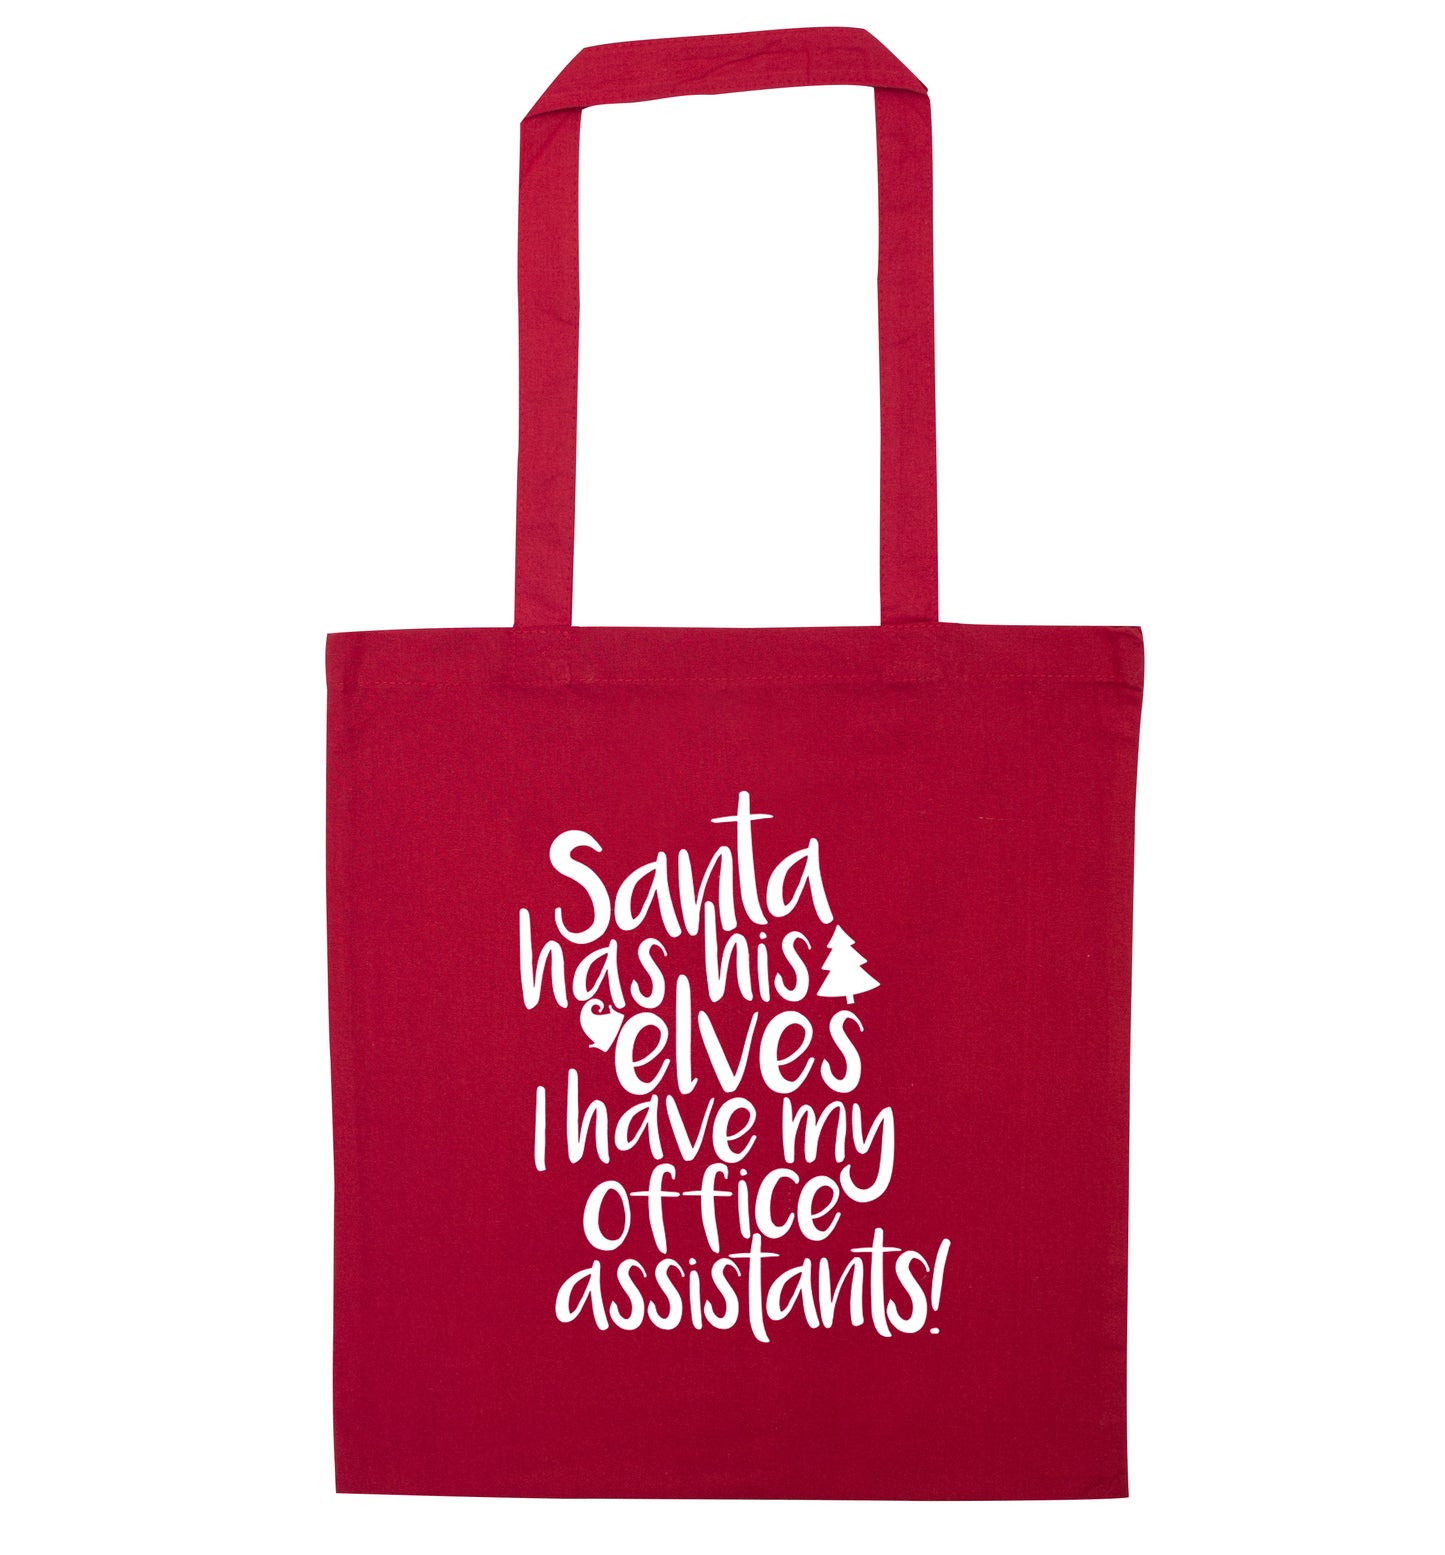 Santa has his elves I have my office assistants red tote bag